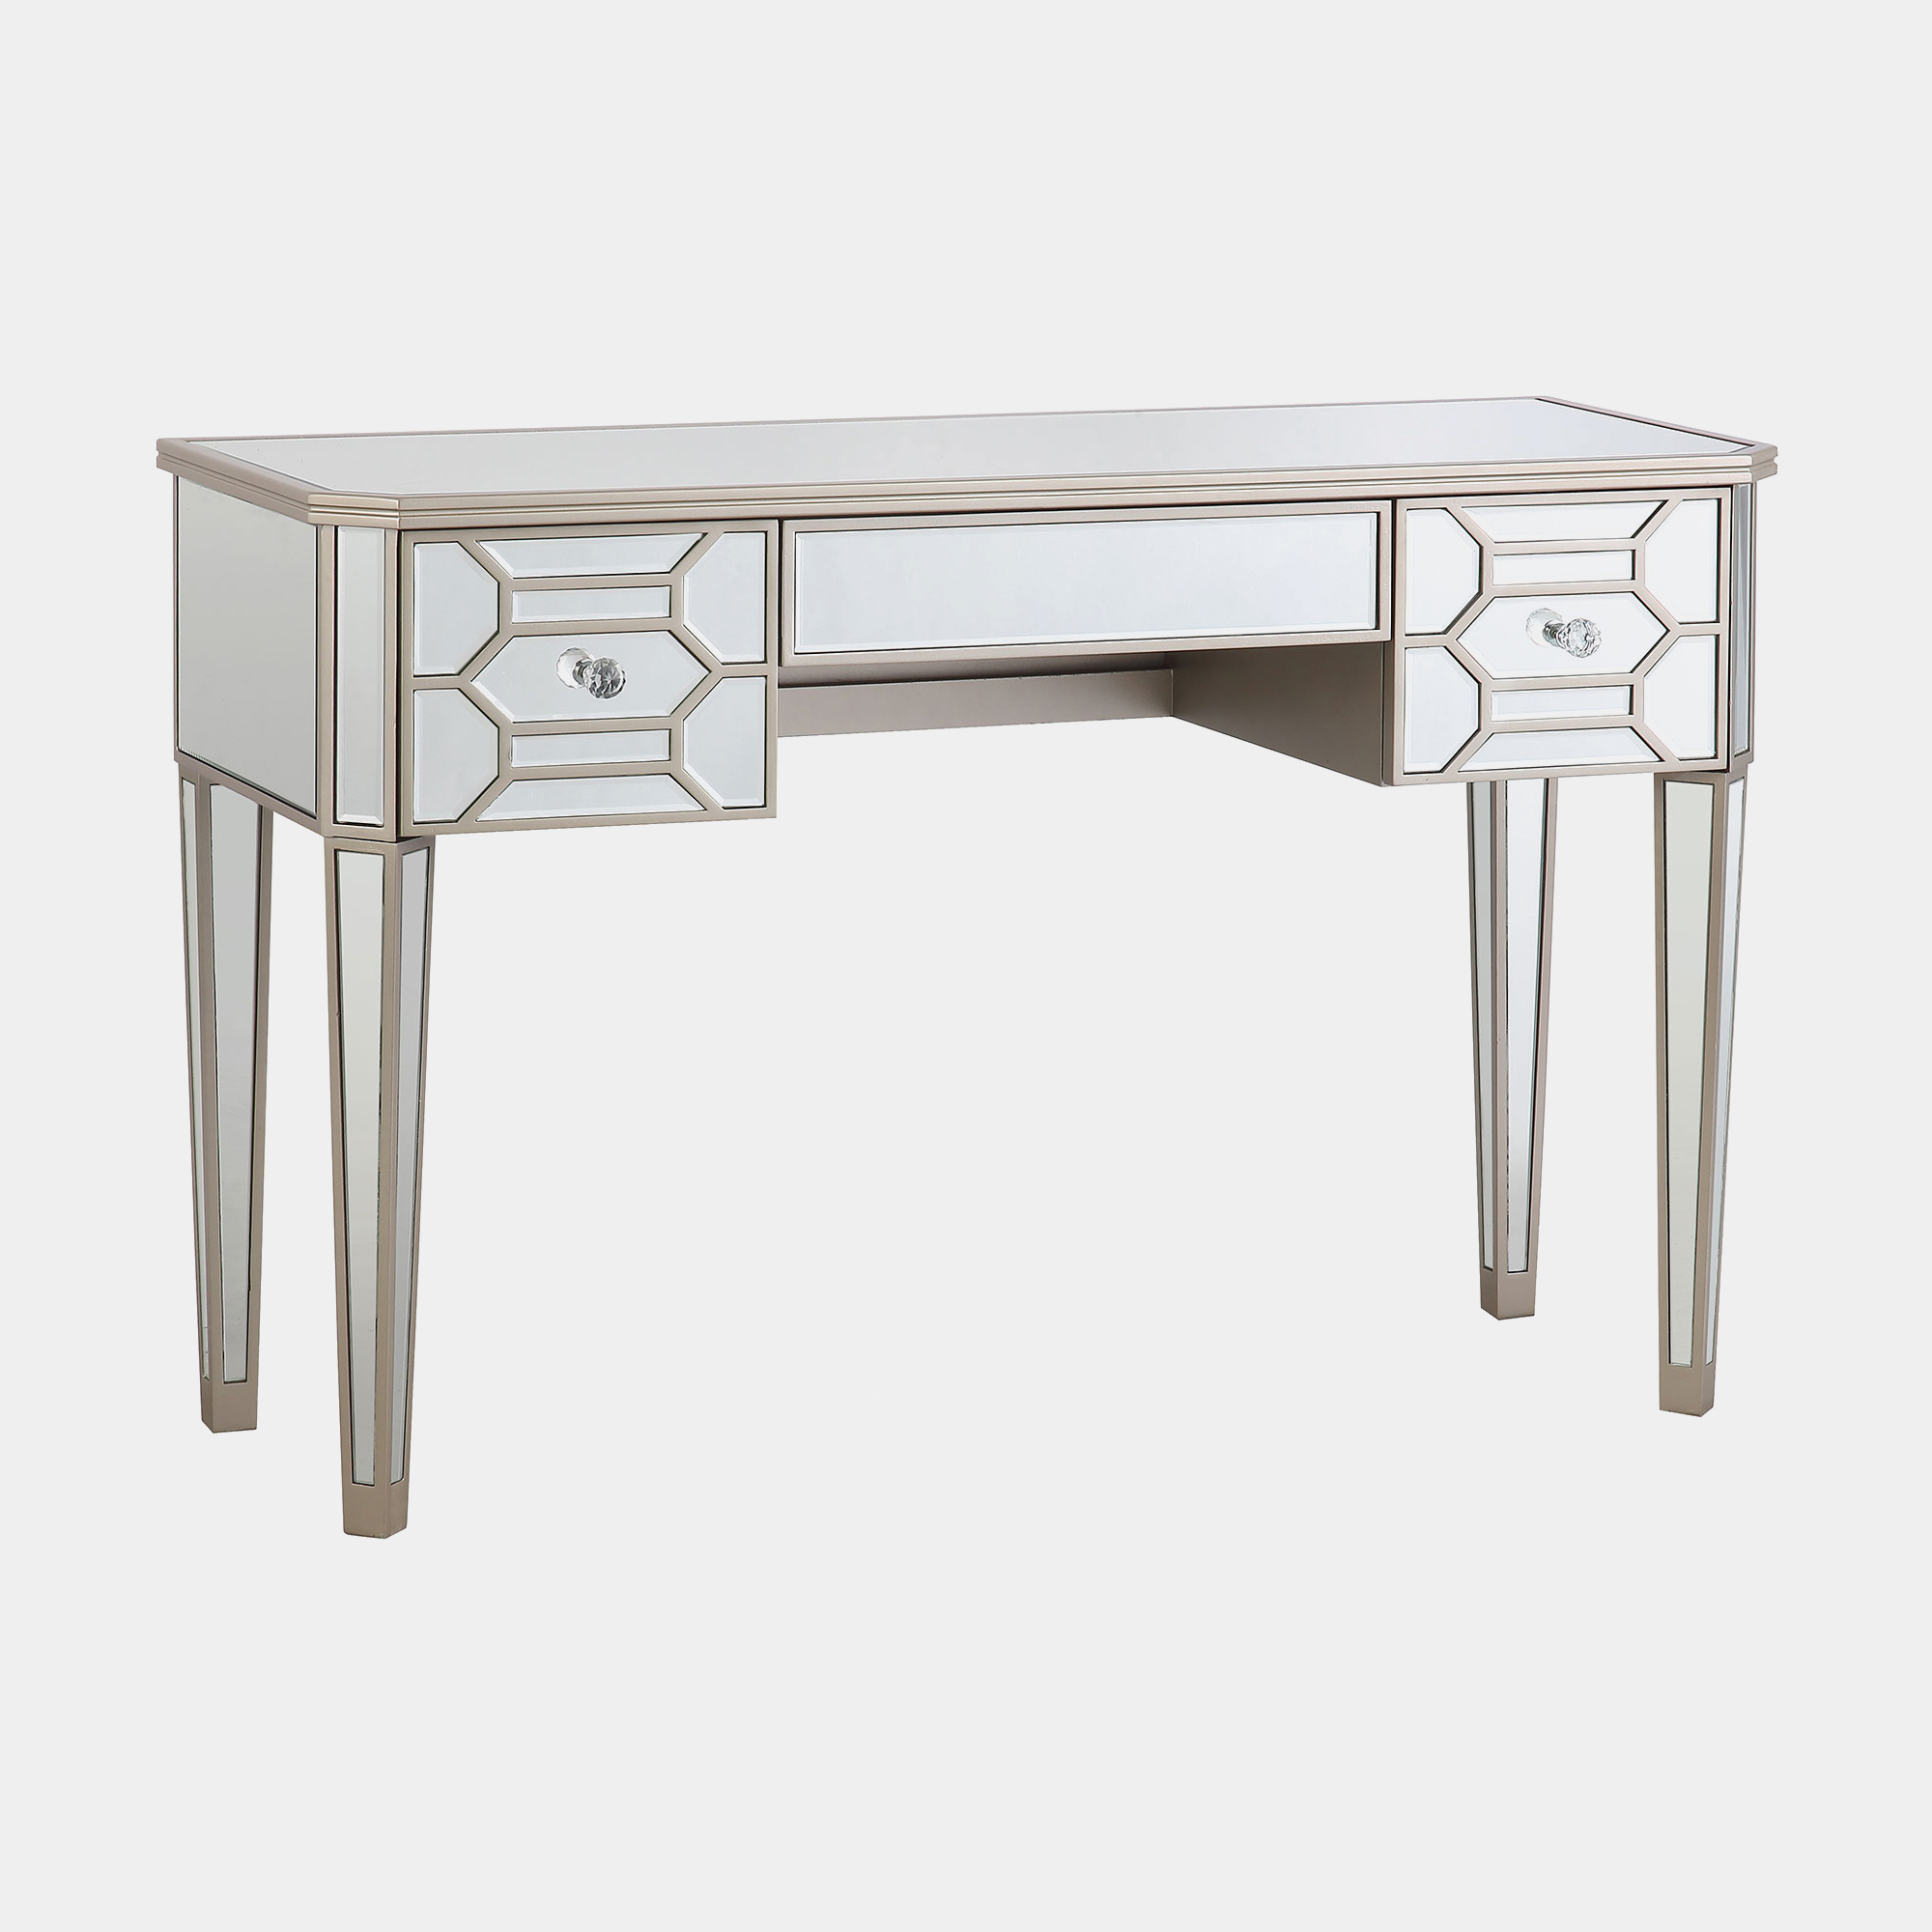 Ruby 3 Drawer Mirrored Dressing Table, Mirrored Dressing Table With Drawers Uk